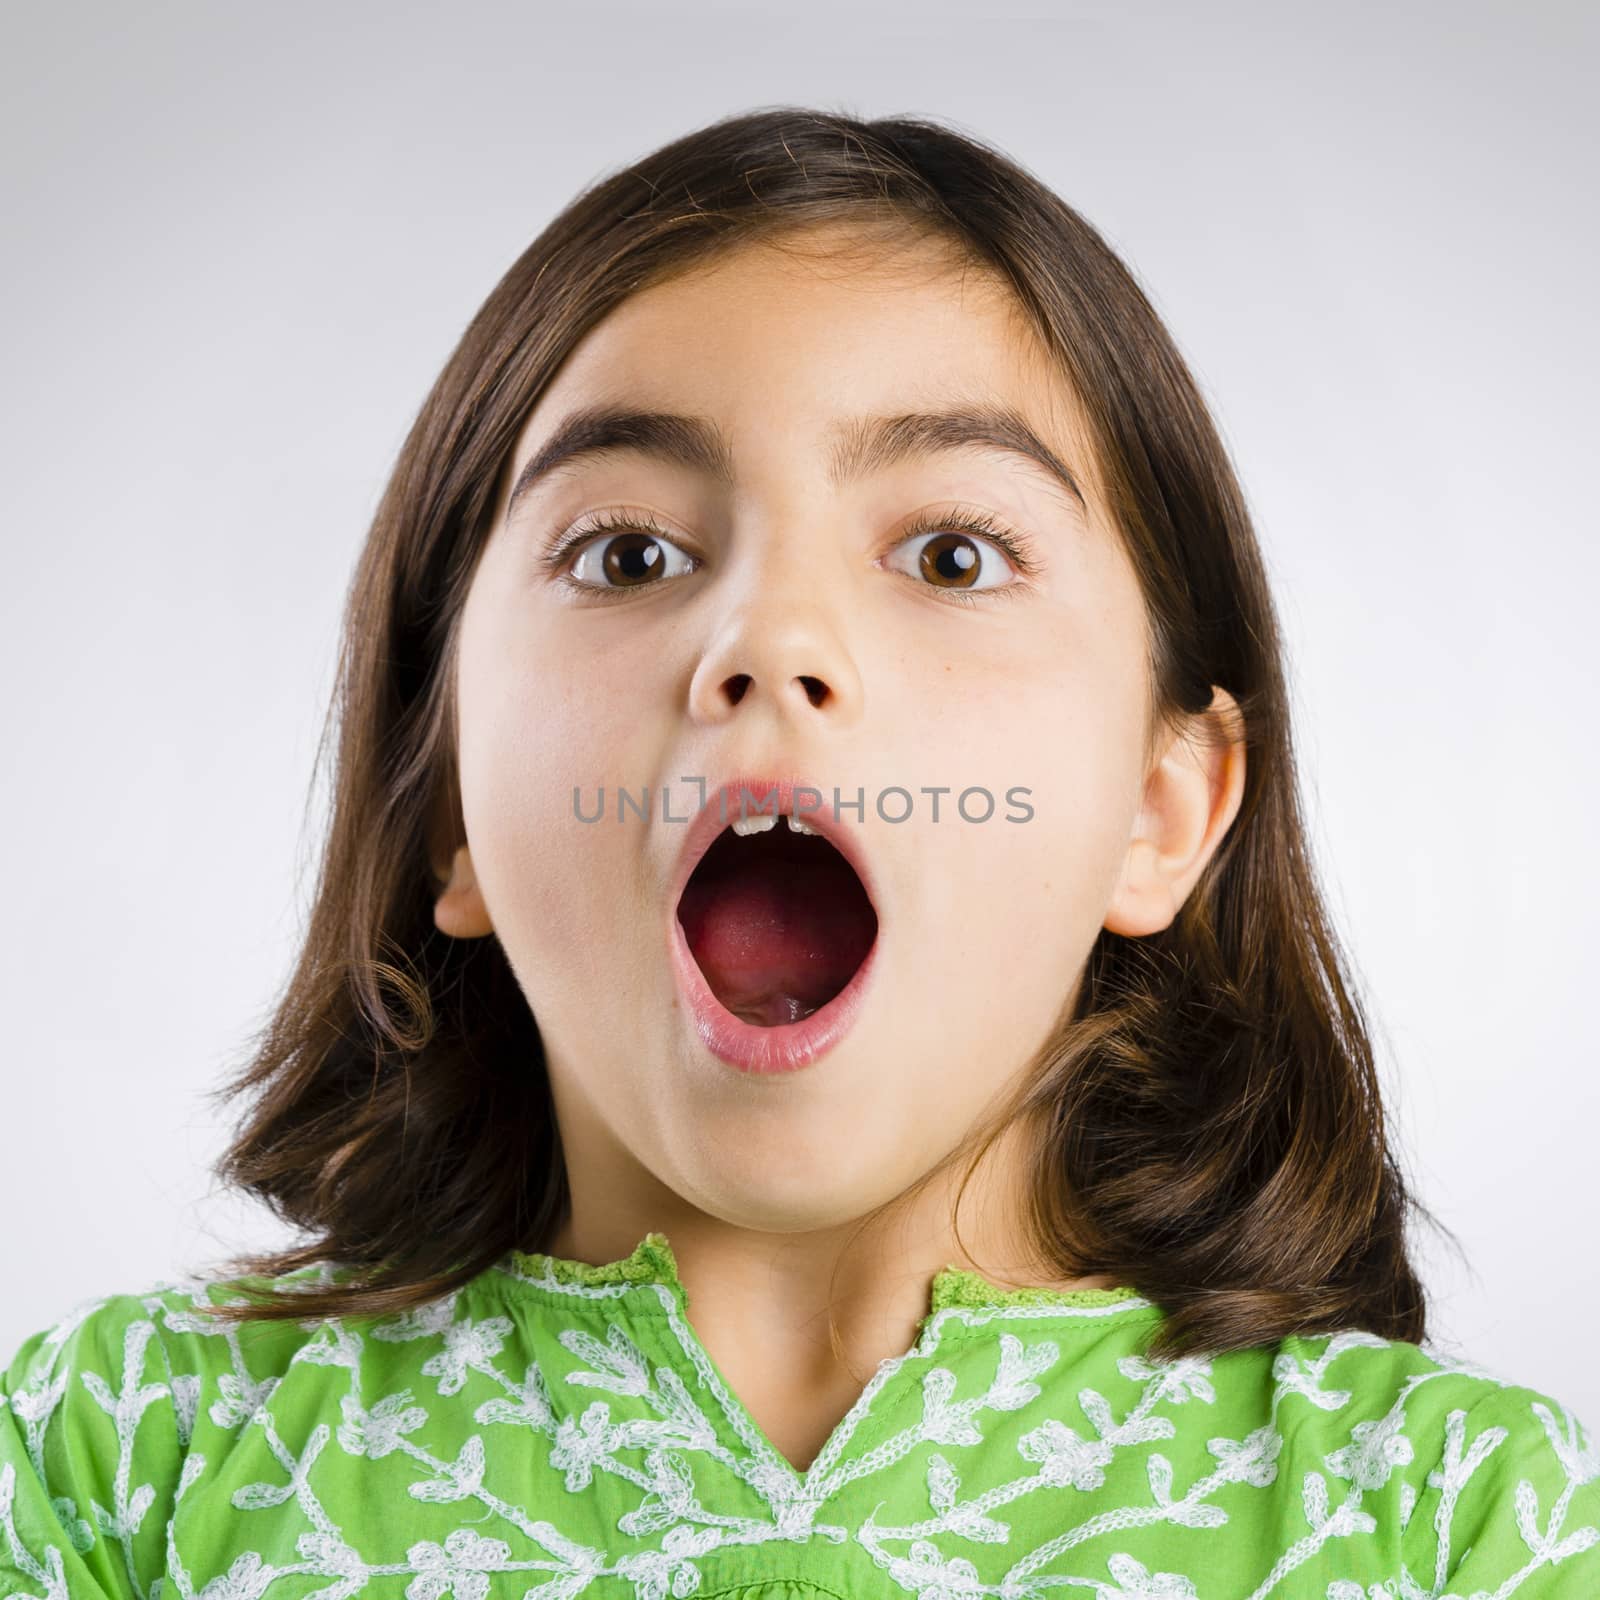 Portrait of a little girl making a astonished mouth expression